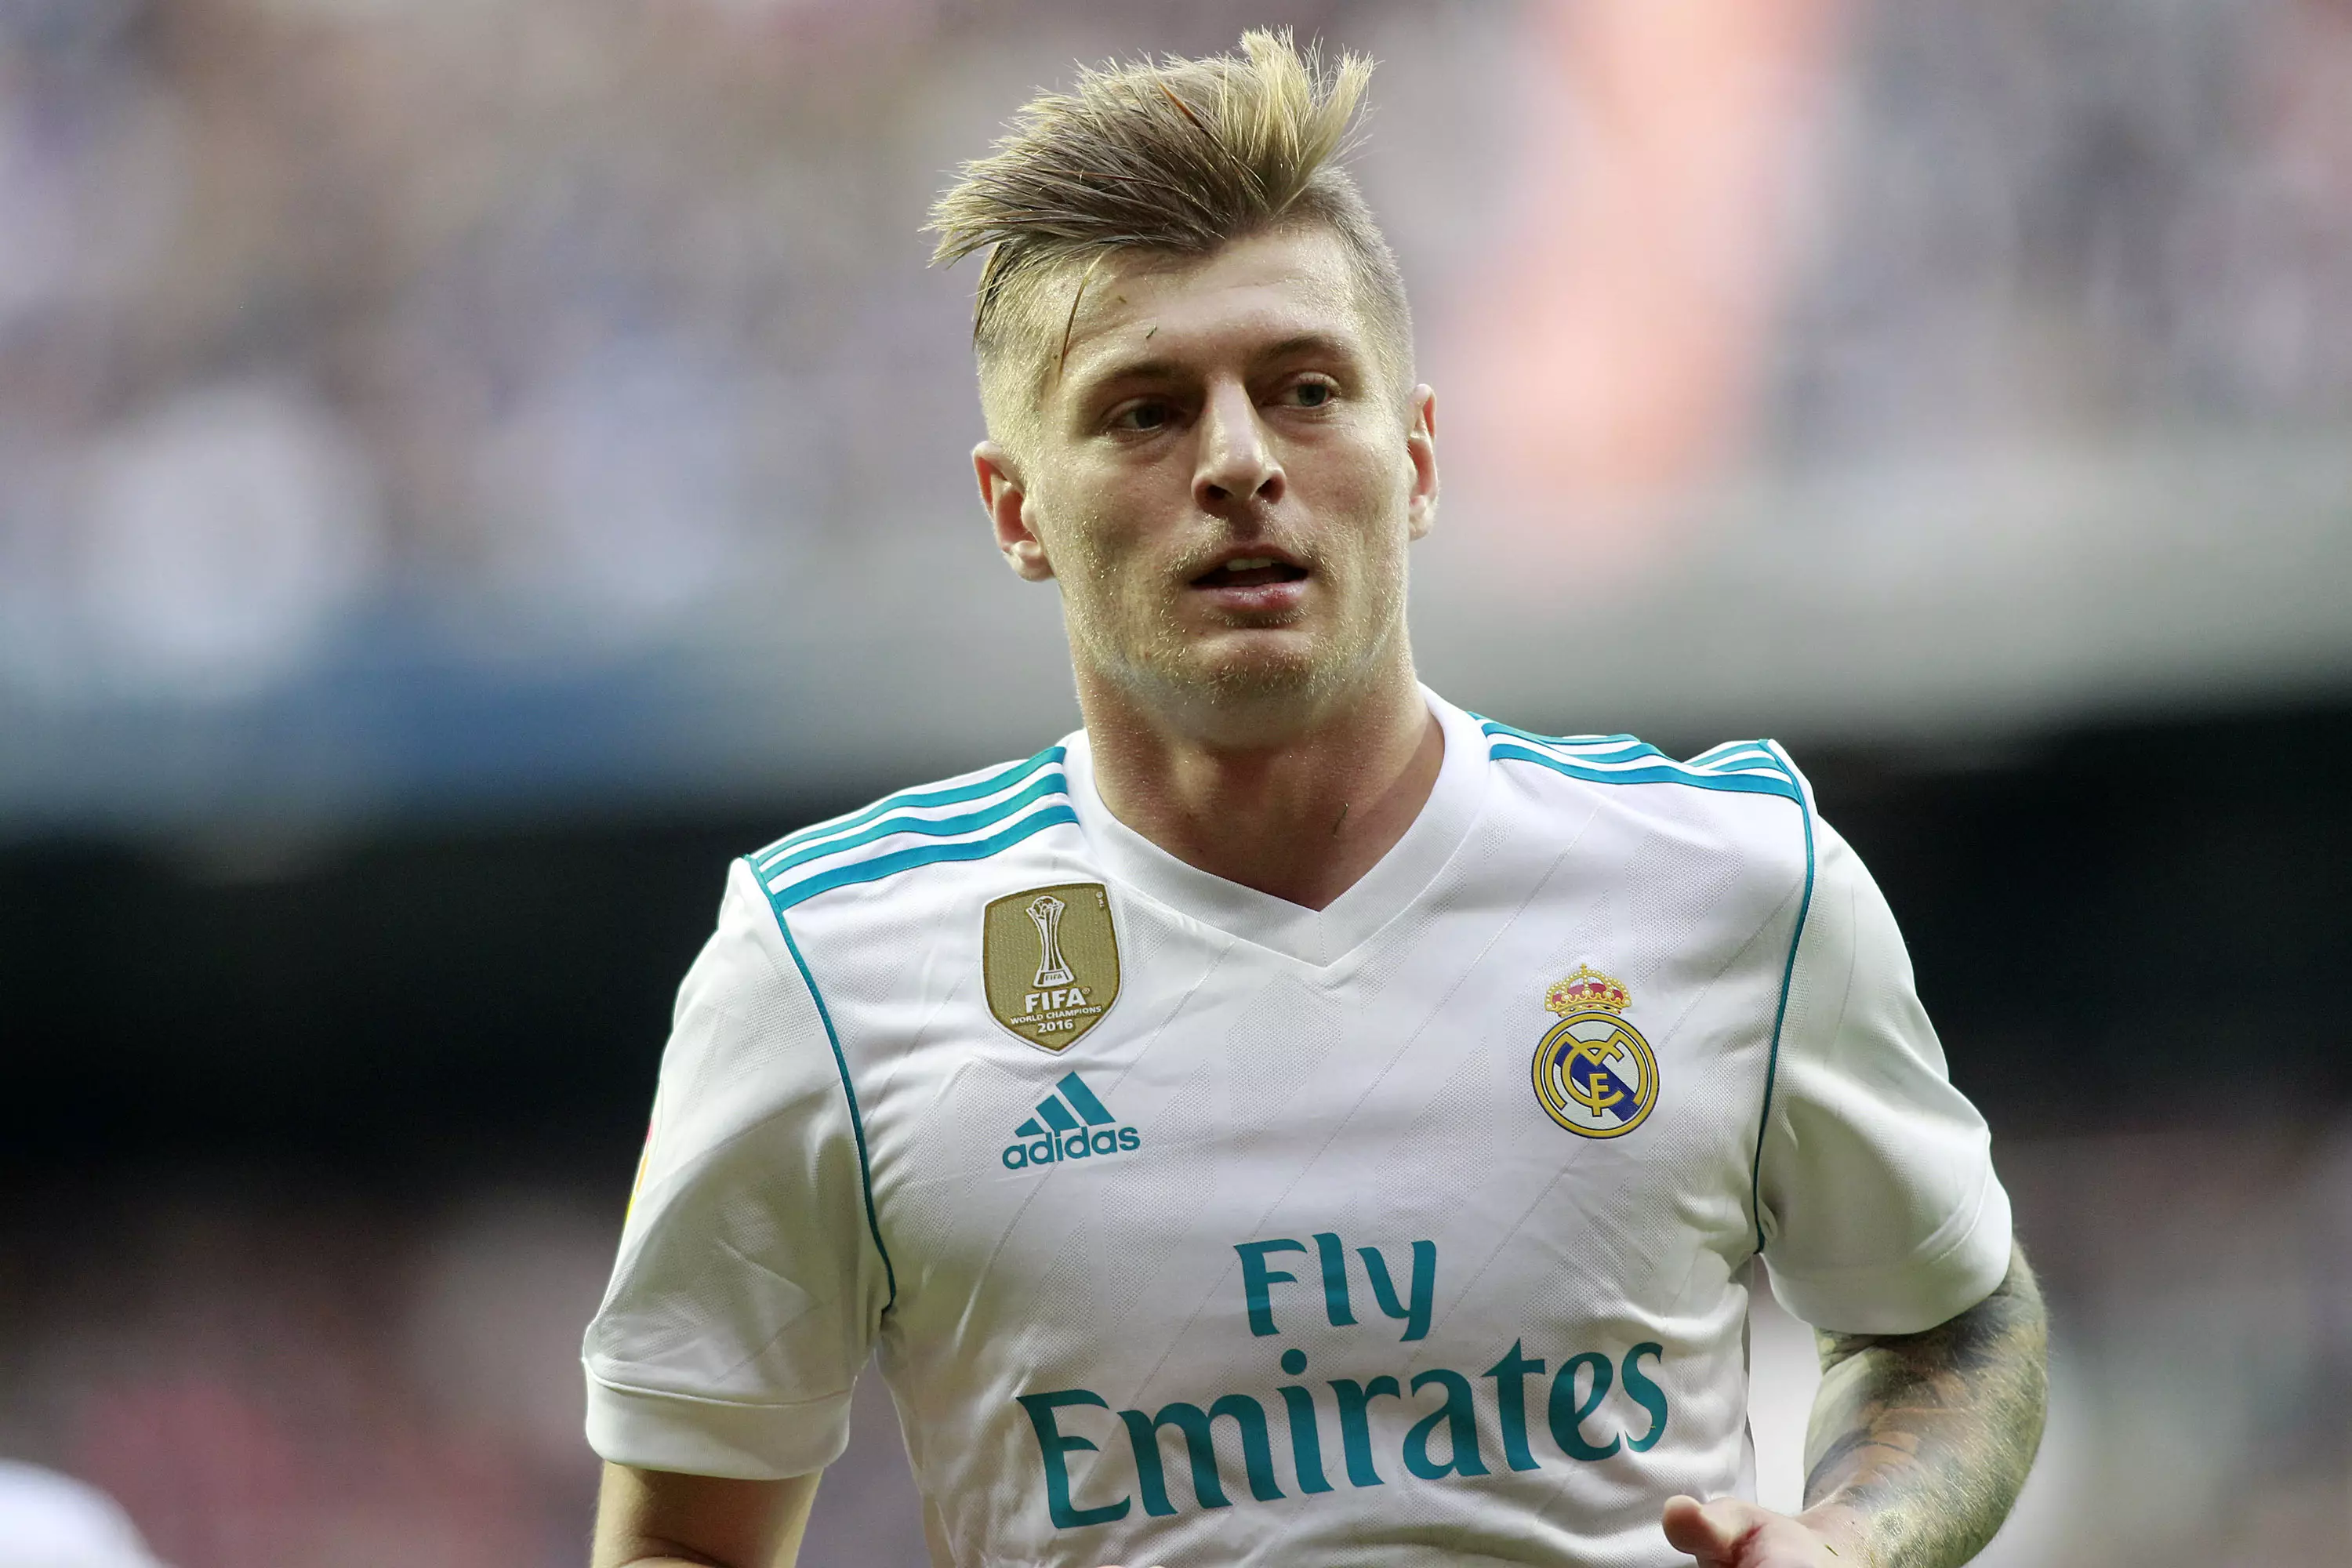 Kroos has become one of the best midfielders in the world. Image: PA Images